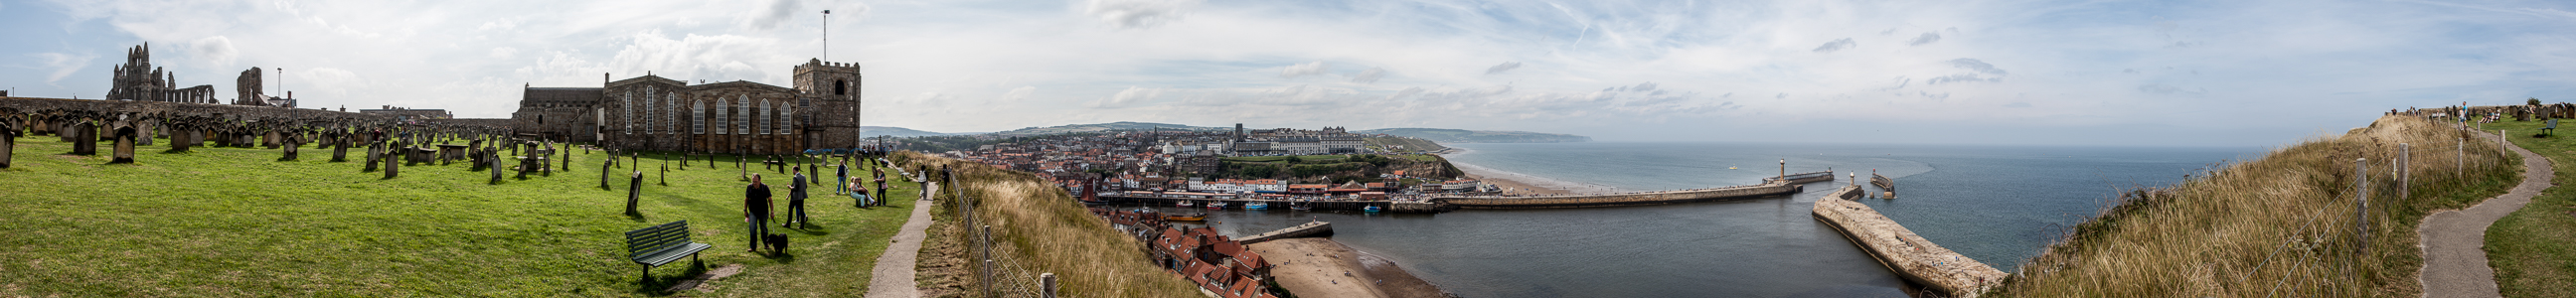 Whitby Abbey, St Mary's Churchyard, St Mary’s Church, Whitby Lower Harbour, West Pier, East Pier, Nordsee Whitby